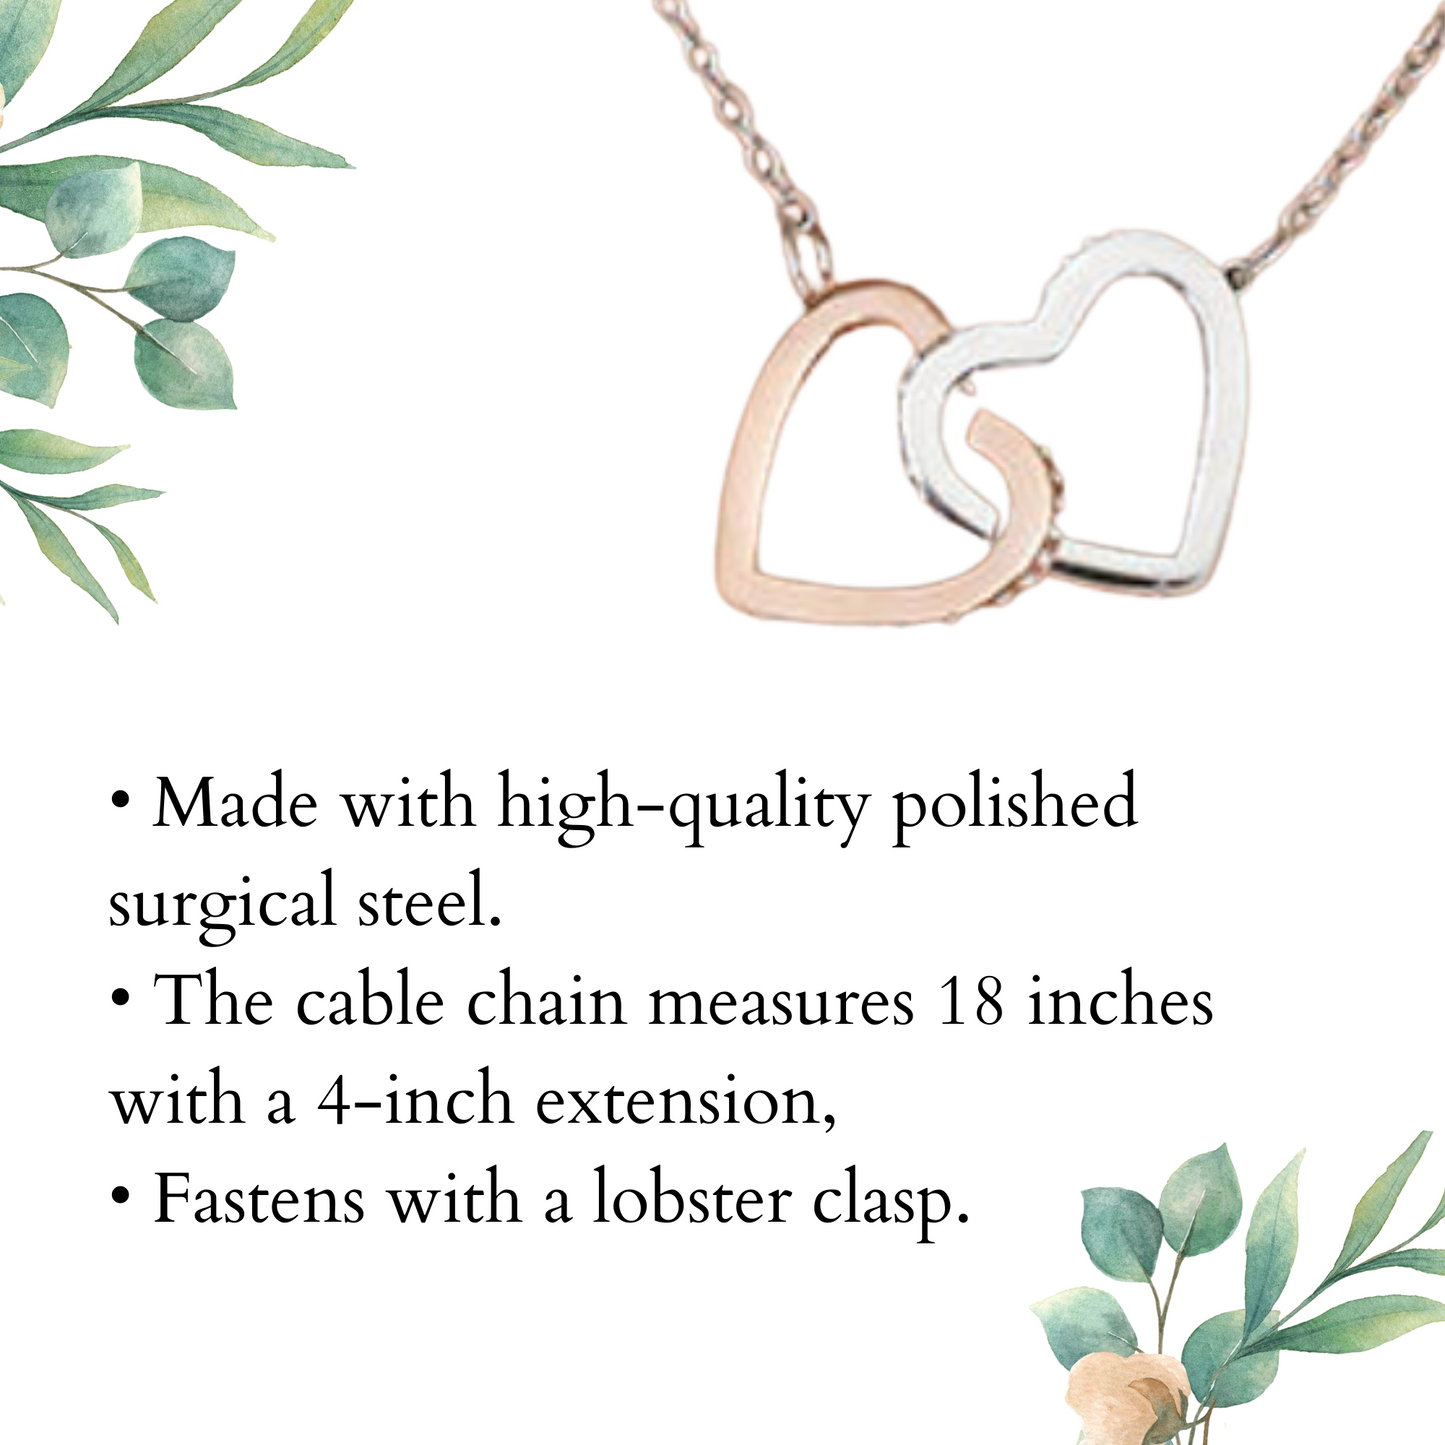 To My Step Daughter - Interlocking Hearts - Pendant Necklace